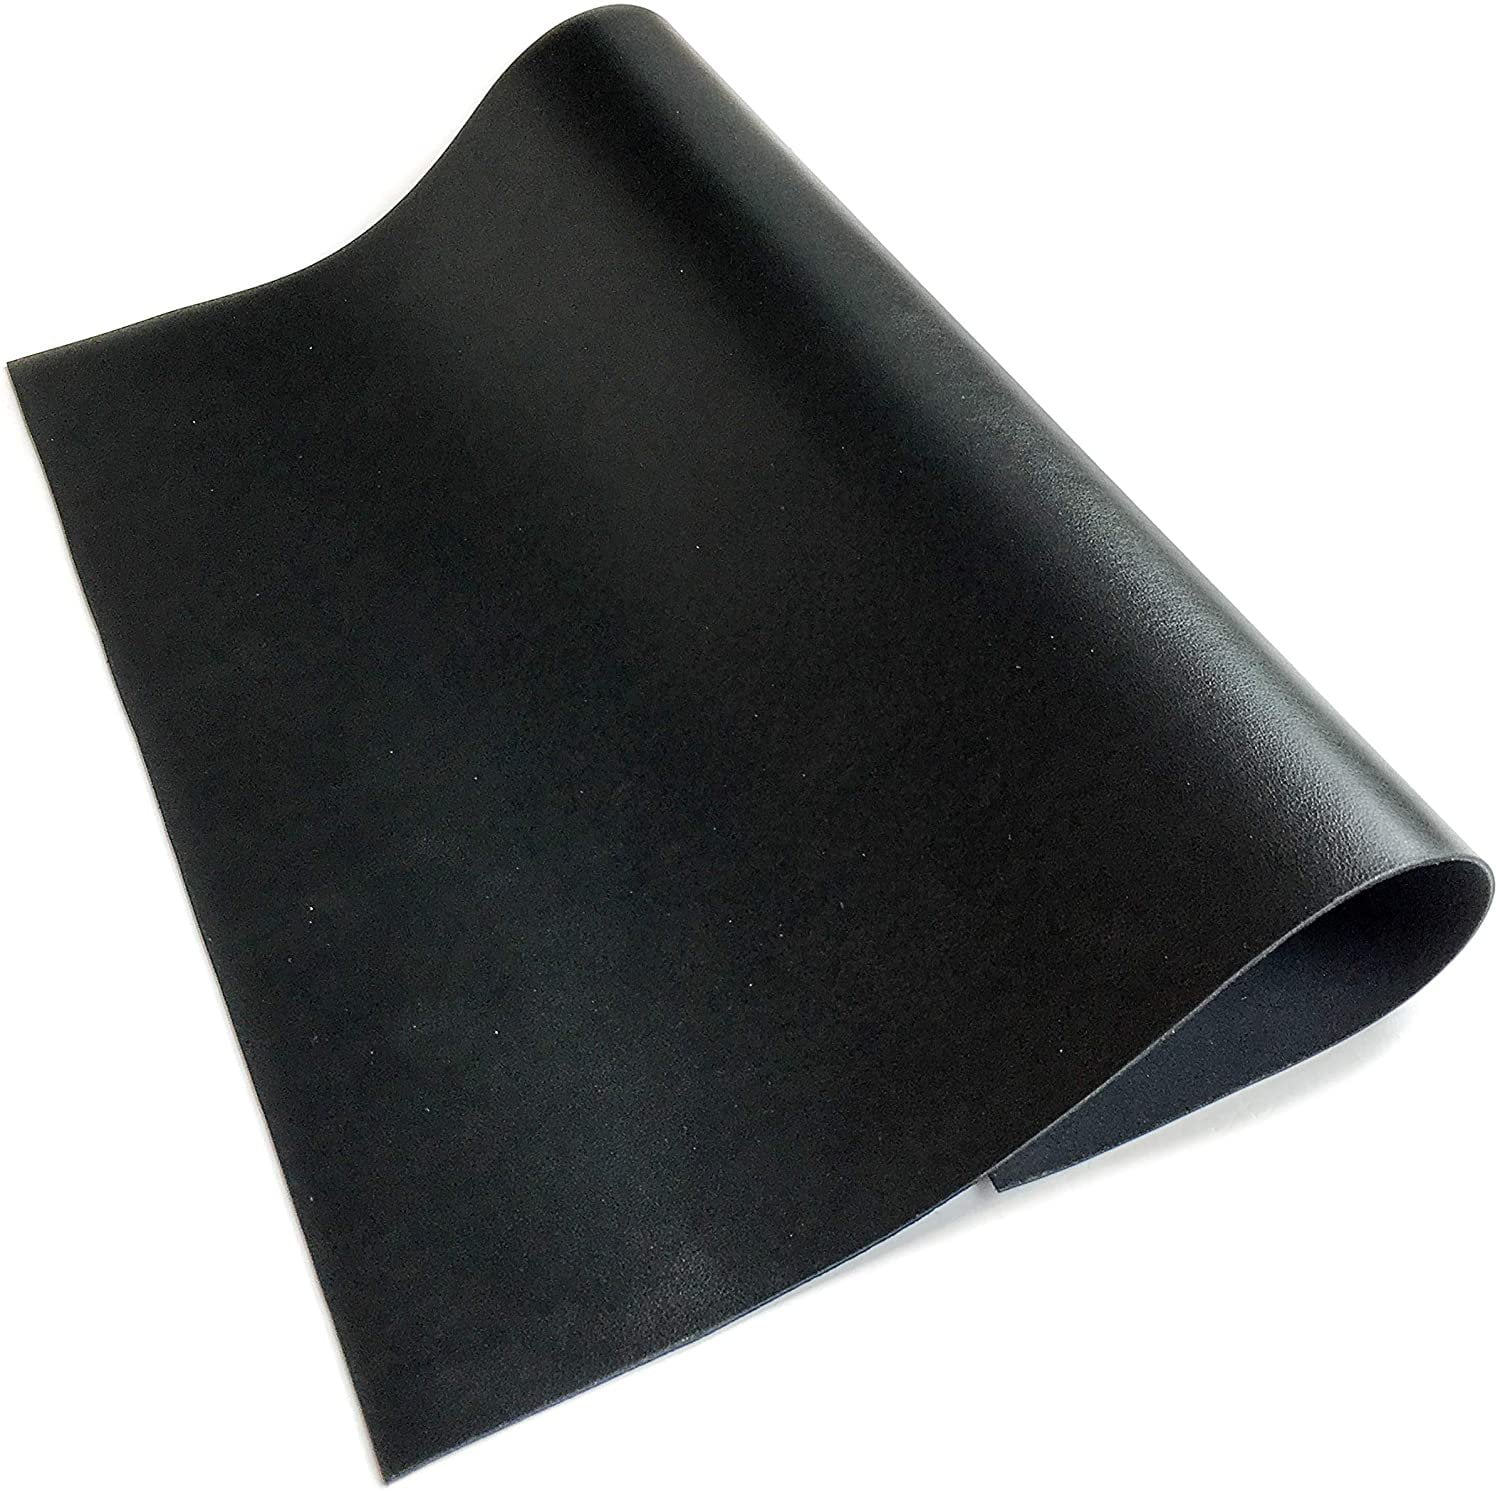 Real Genuine Black Calf Hide Leather, Cow Hide Leather